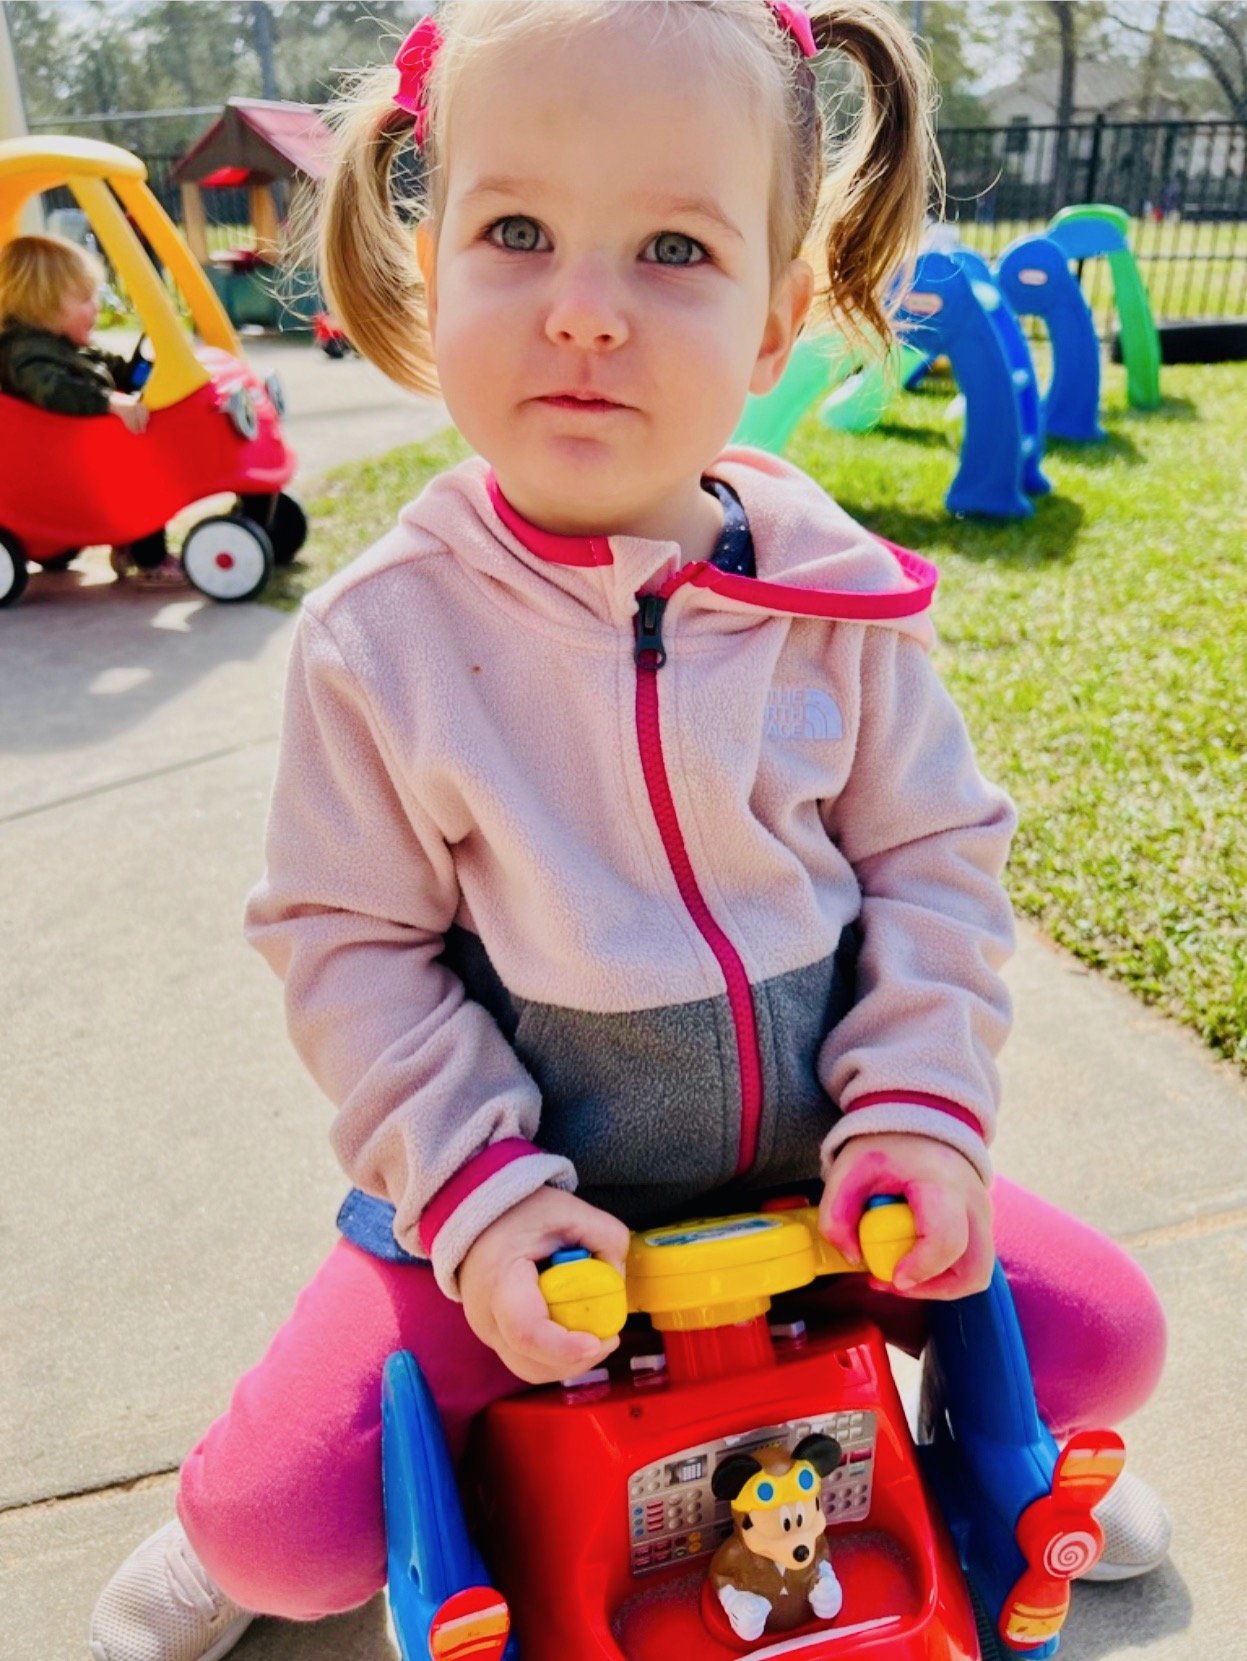 Toddler student riding on a toy truck